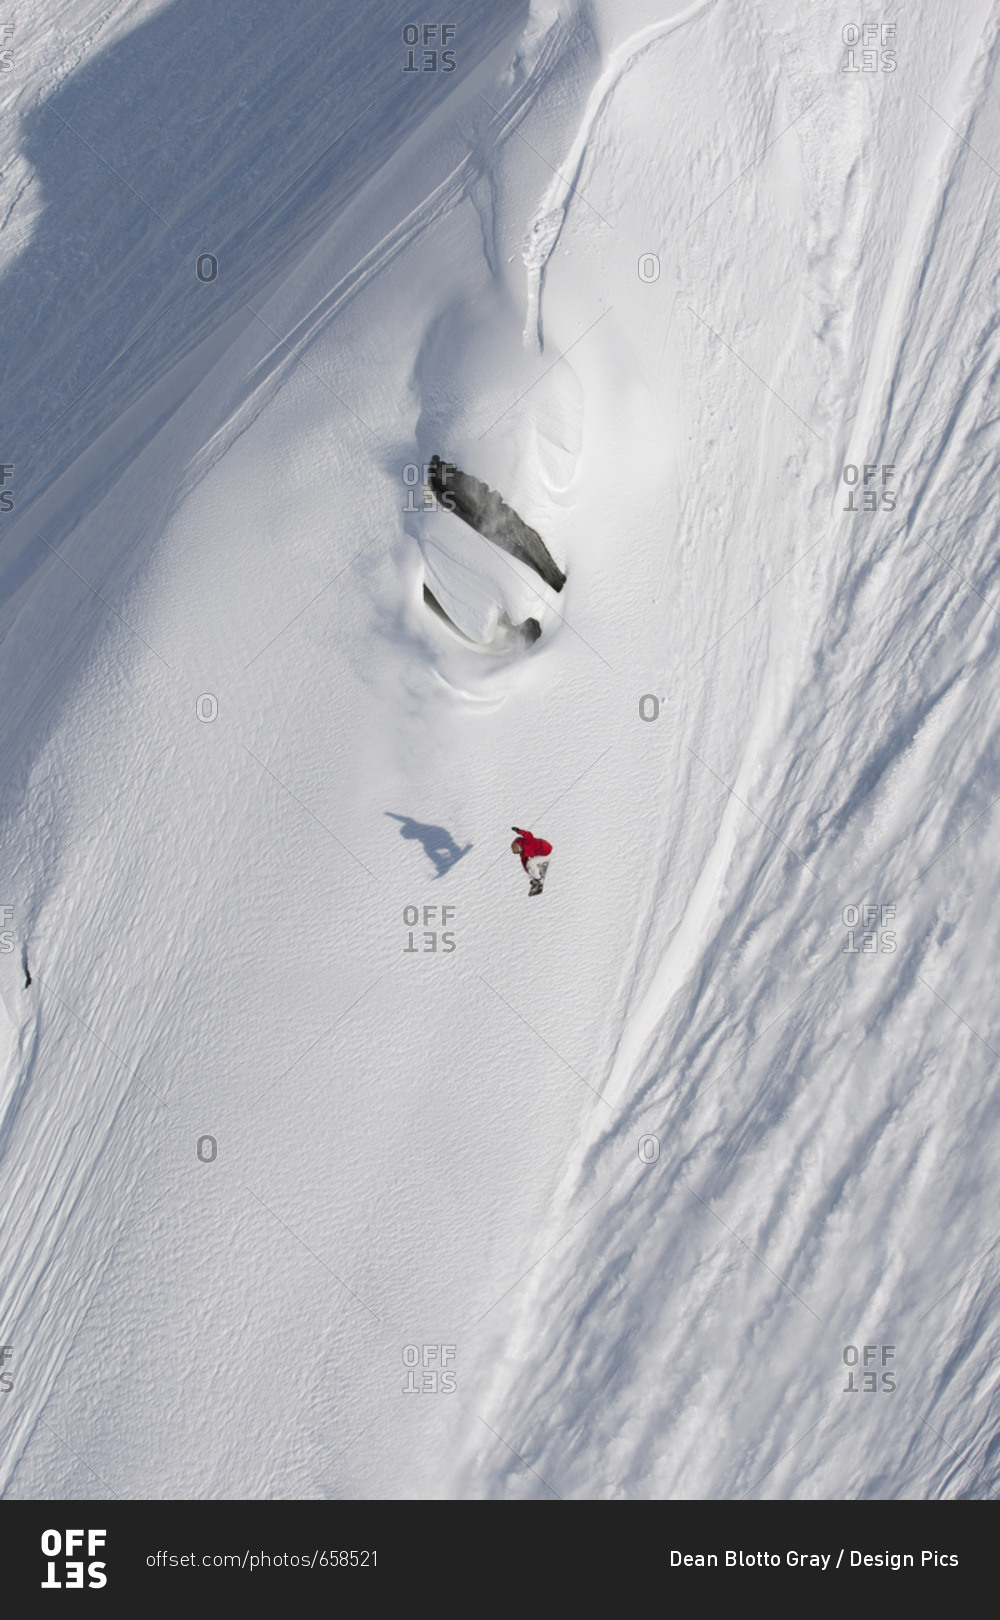 Extreme Snowboarding On A Snow Covered Slope; Haines, Alaska, United States Of America